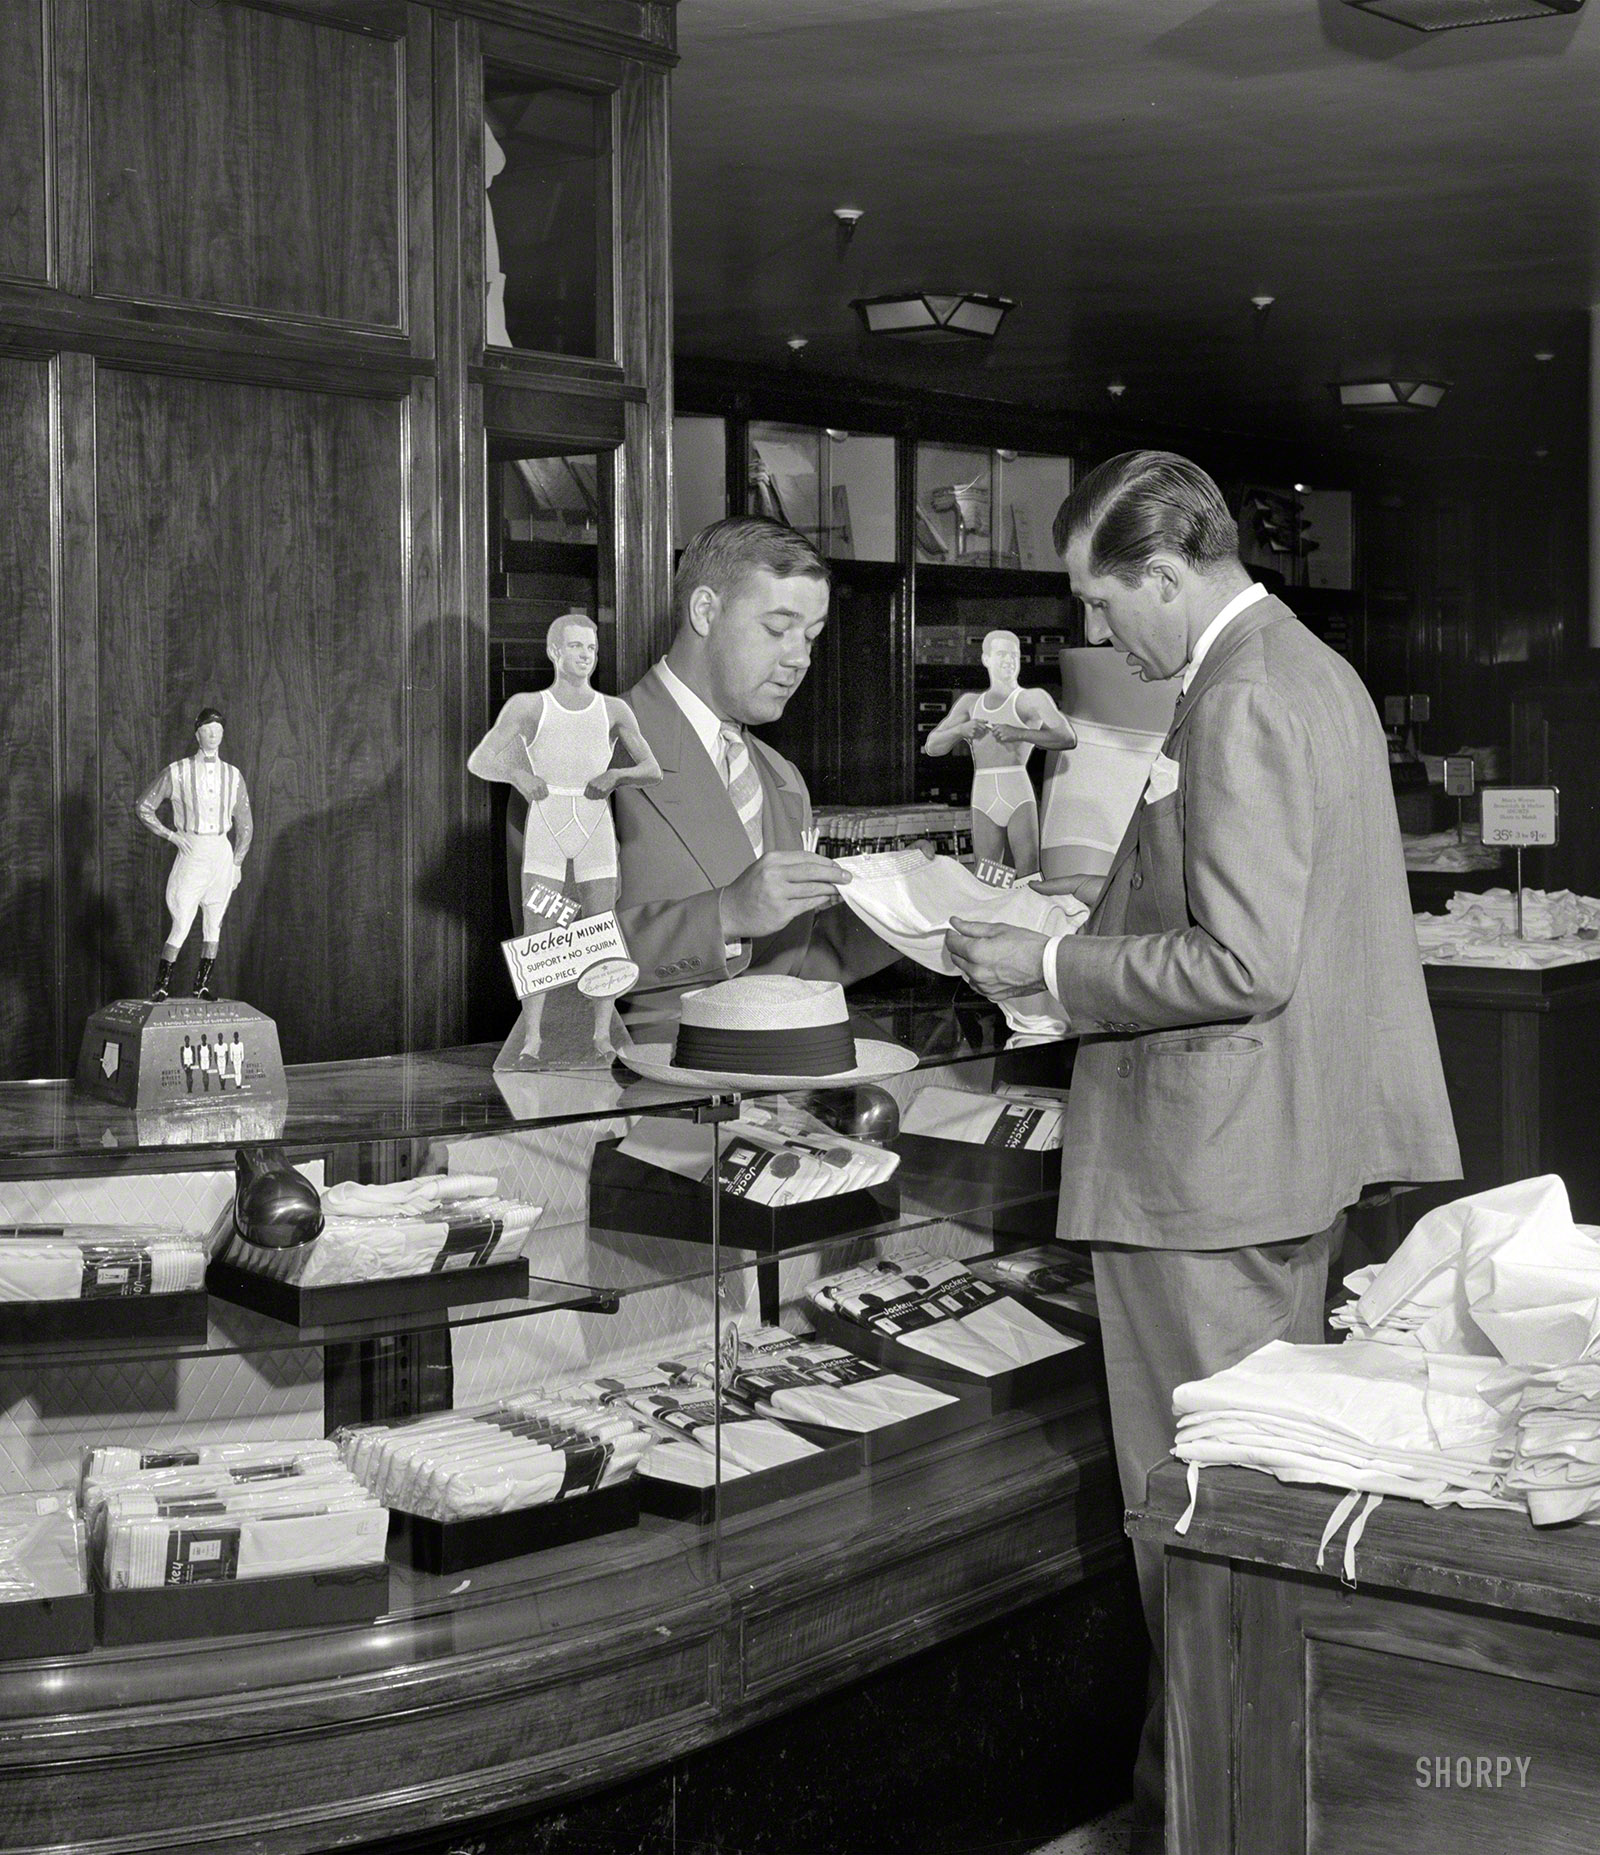 July 1941. "Detroit, Michigan. Buying men's shorts in the Crowley-Milner department store." Not just any shorts, but "No-Squirm" Jockeys. Large-format negative by Arthur Siegel for the Office of War Information. View full size.